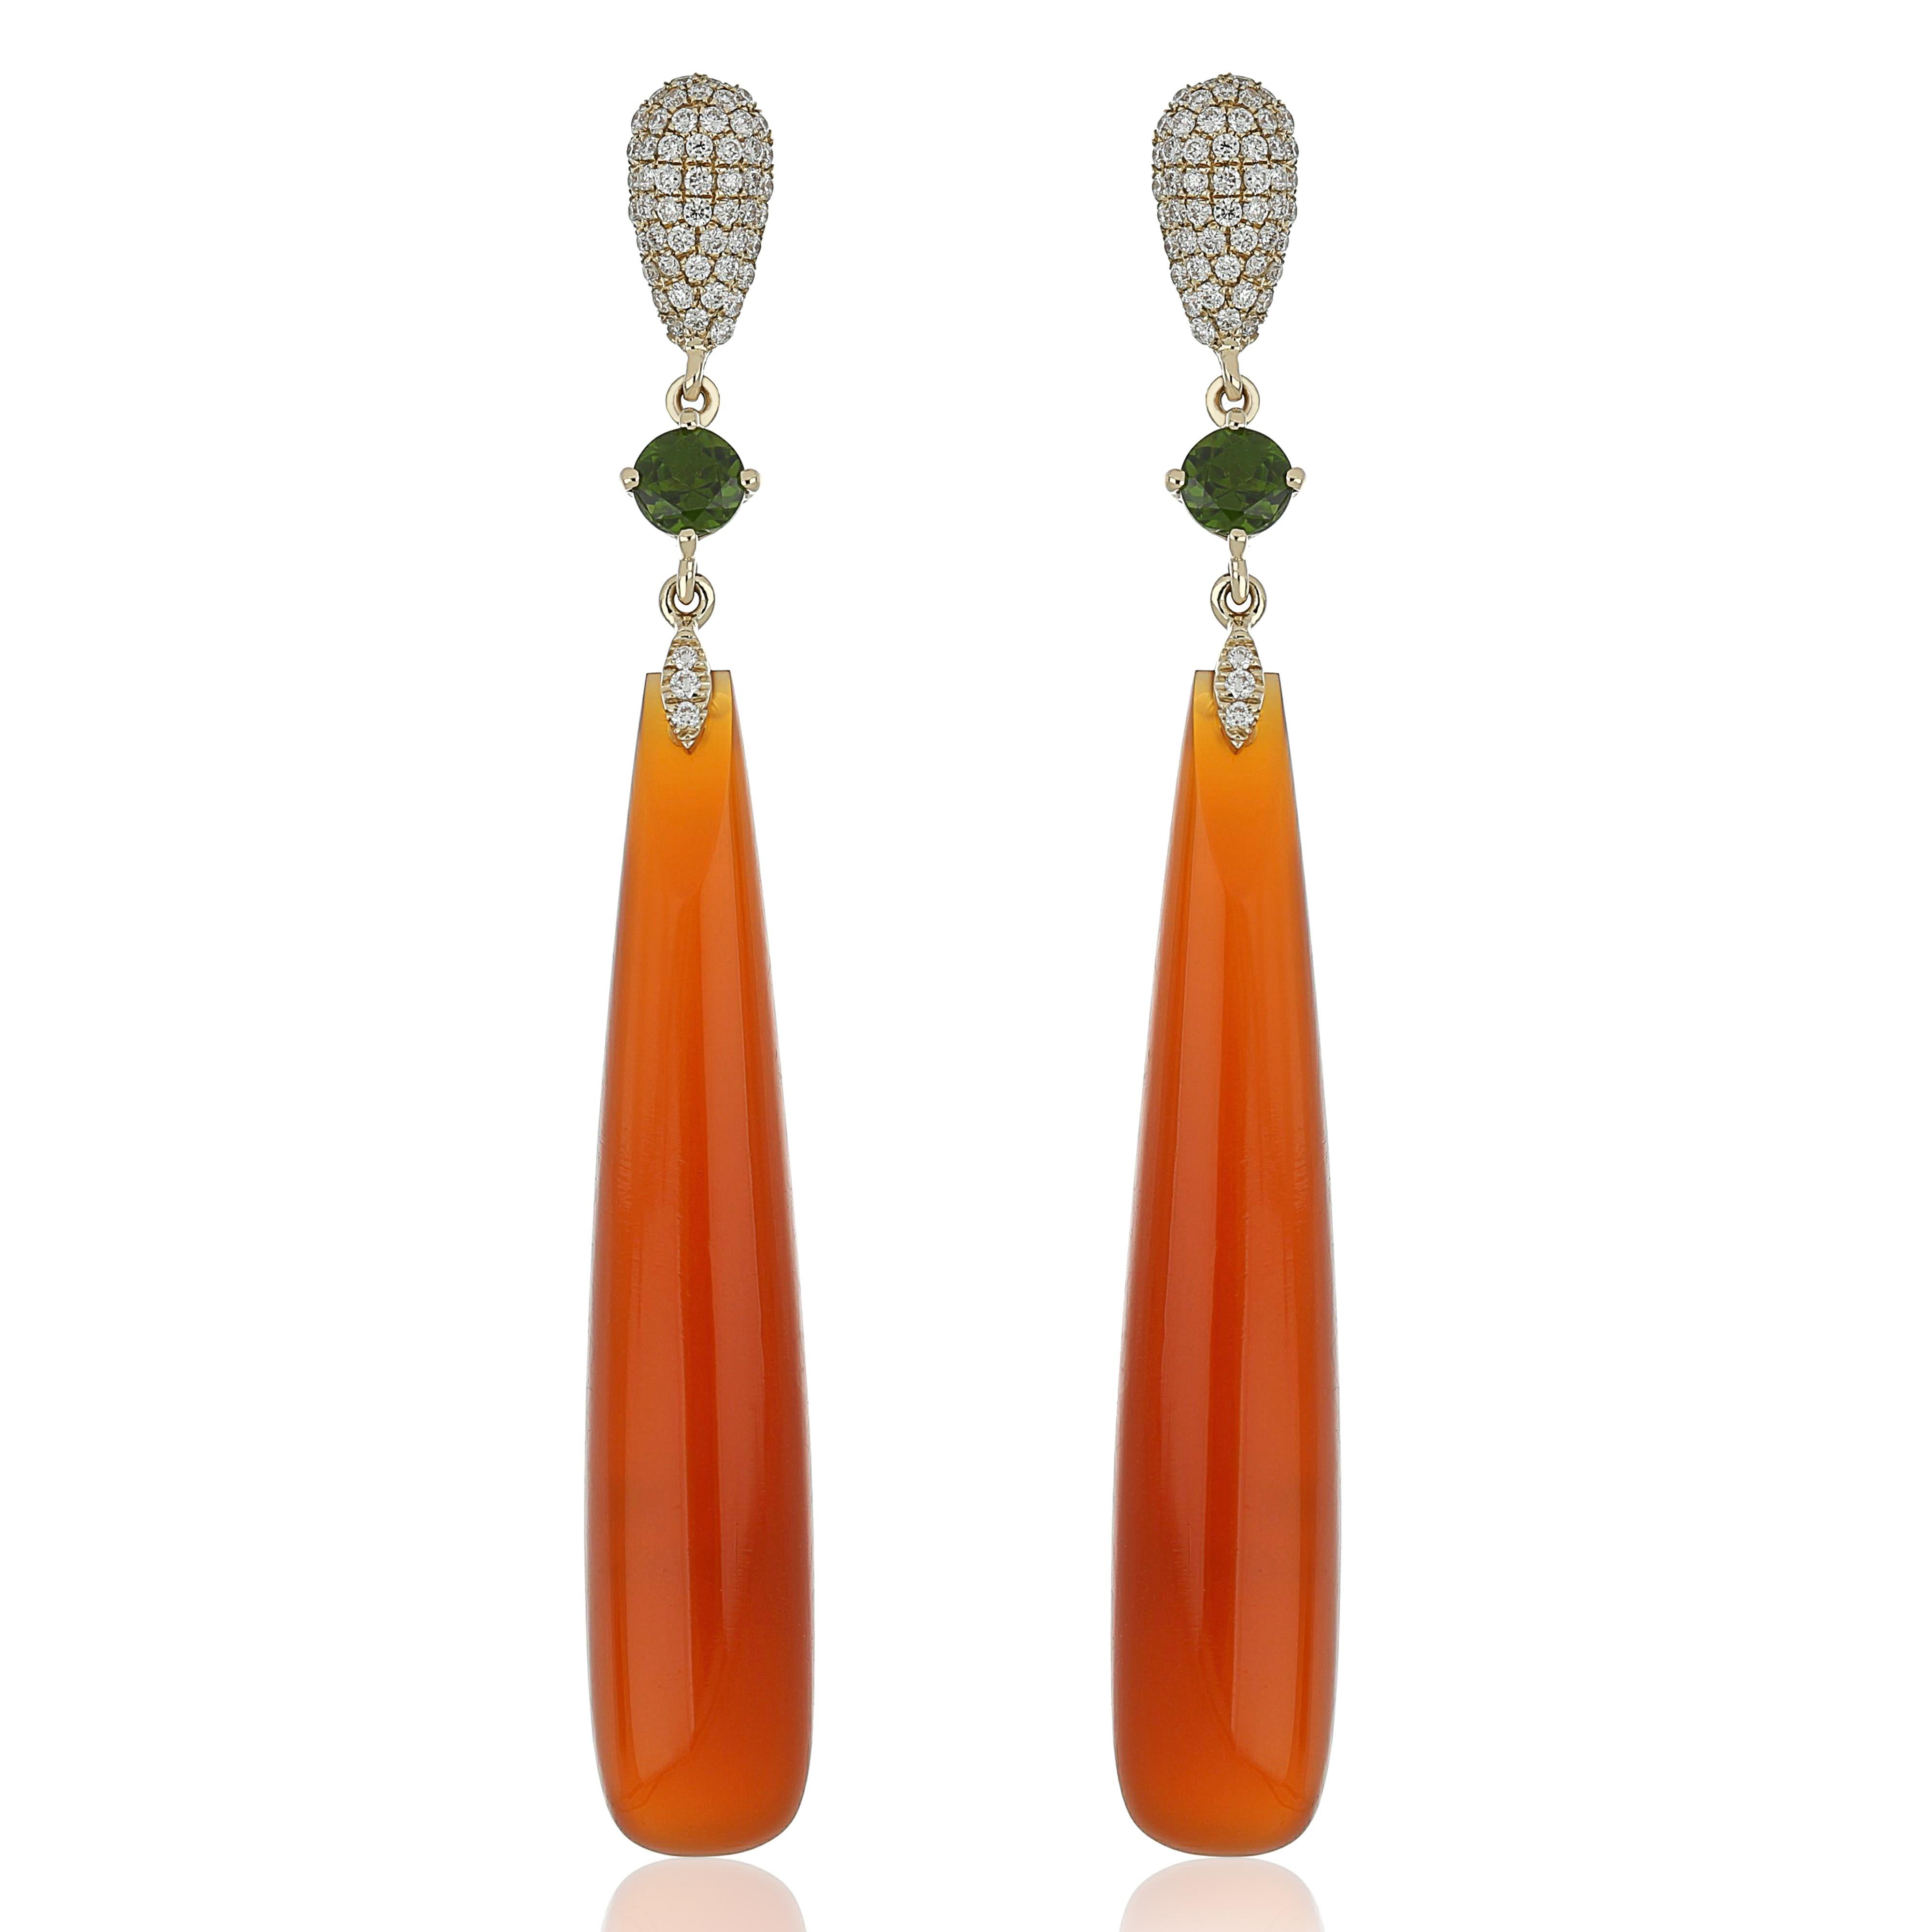 Elegant and exquisitely detailed 14 Karat Yellow Gold Dangle Earring, set with 24.36Cts .Pear  Drop Shape Carnelian accented with 0.43 Cts Chrome Diopside and micro pave set  0.29 Cts Diamonds Beautifully Hand crafted in 14 Karat Yellow Gold.

Stone